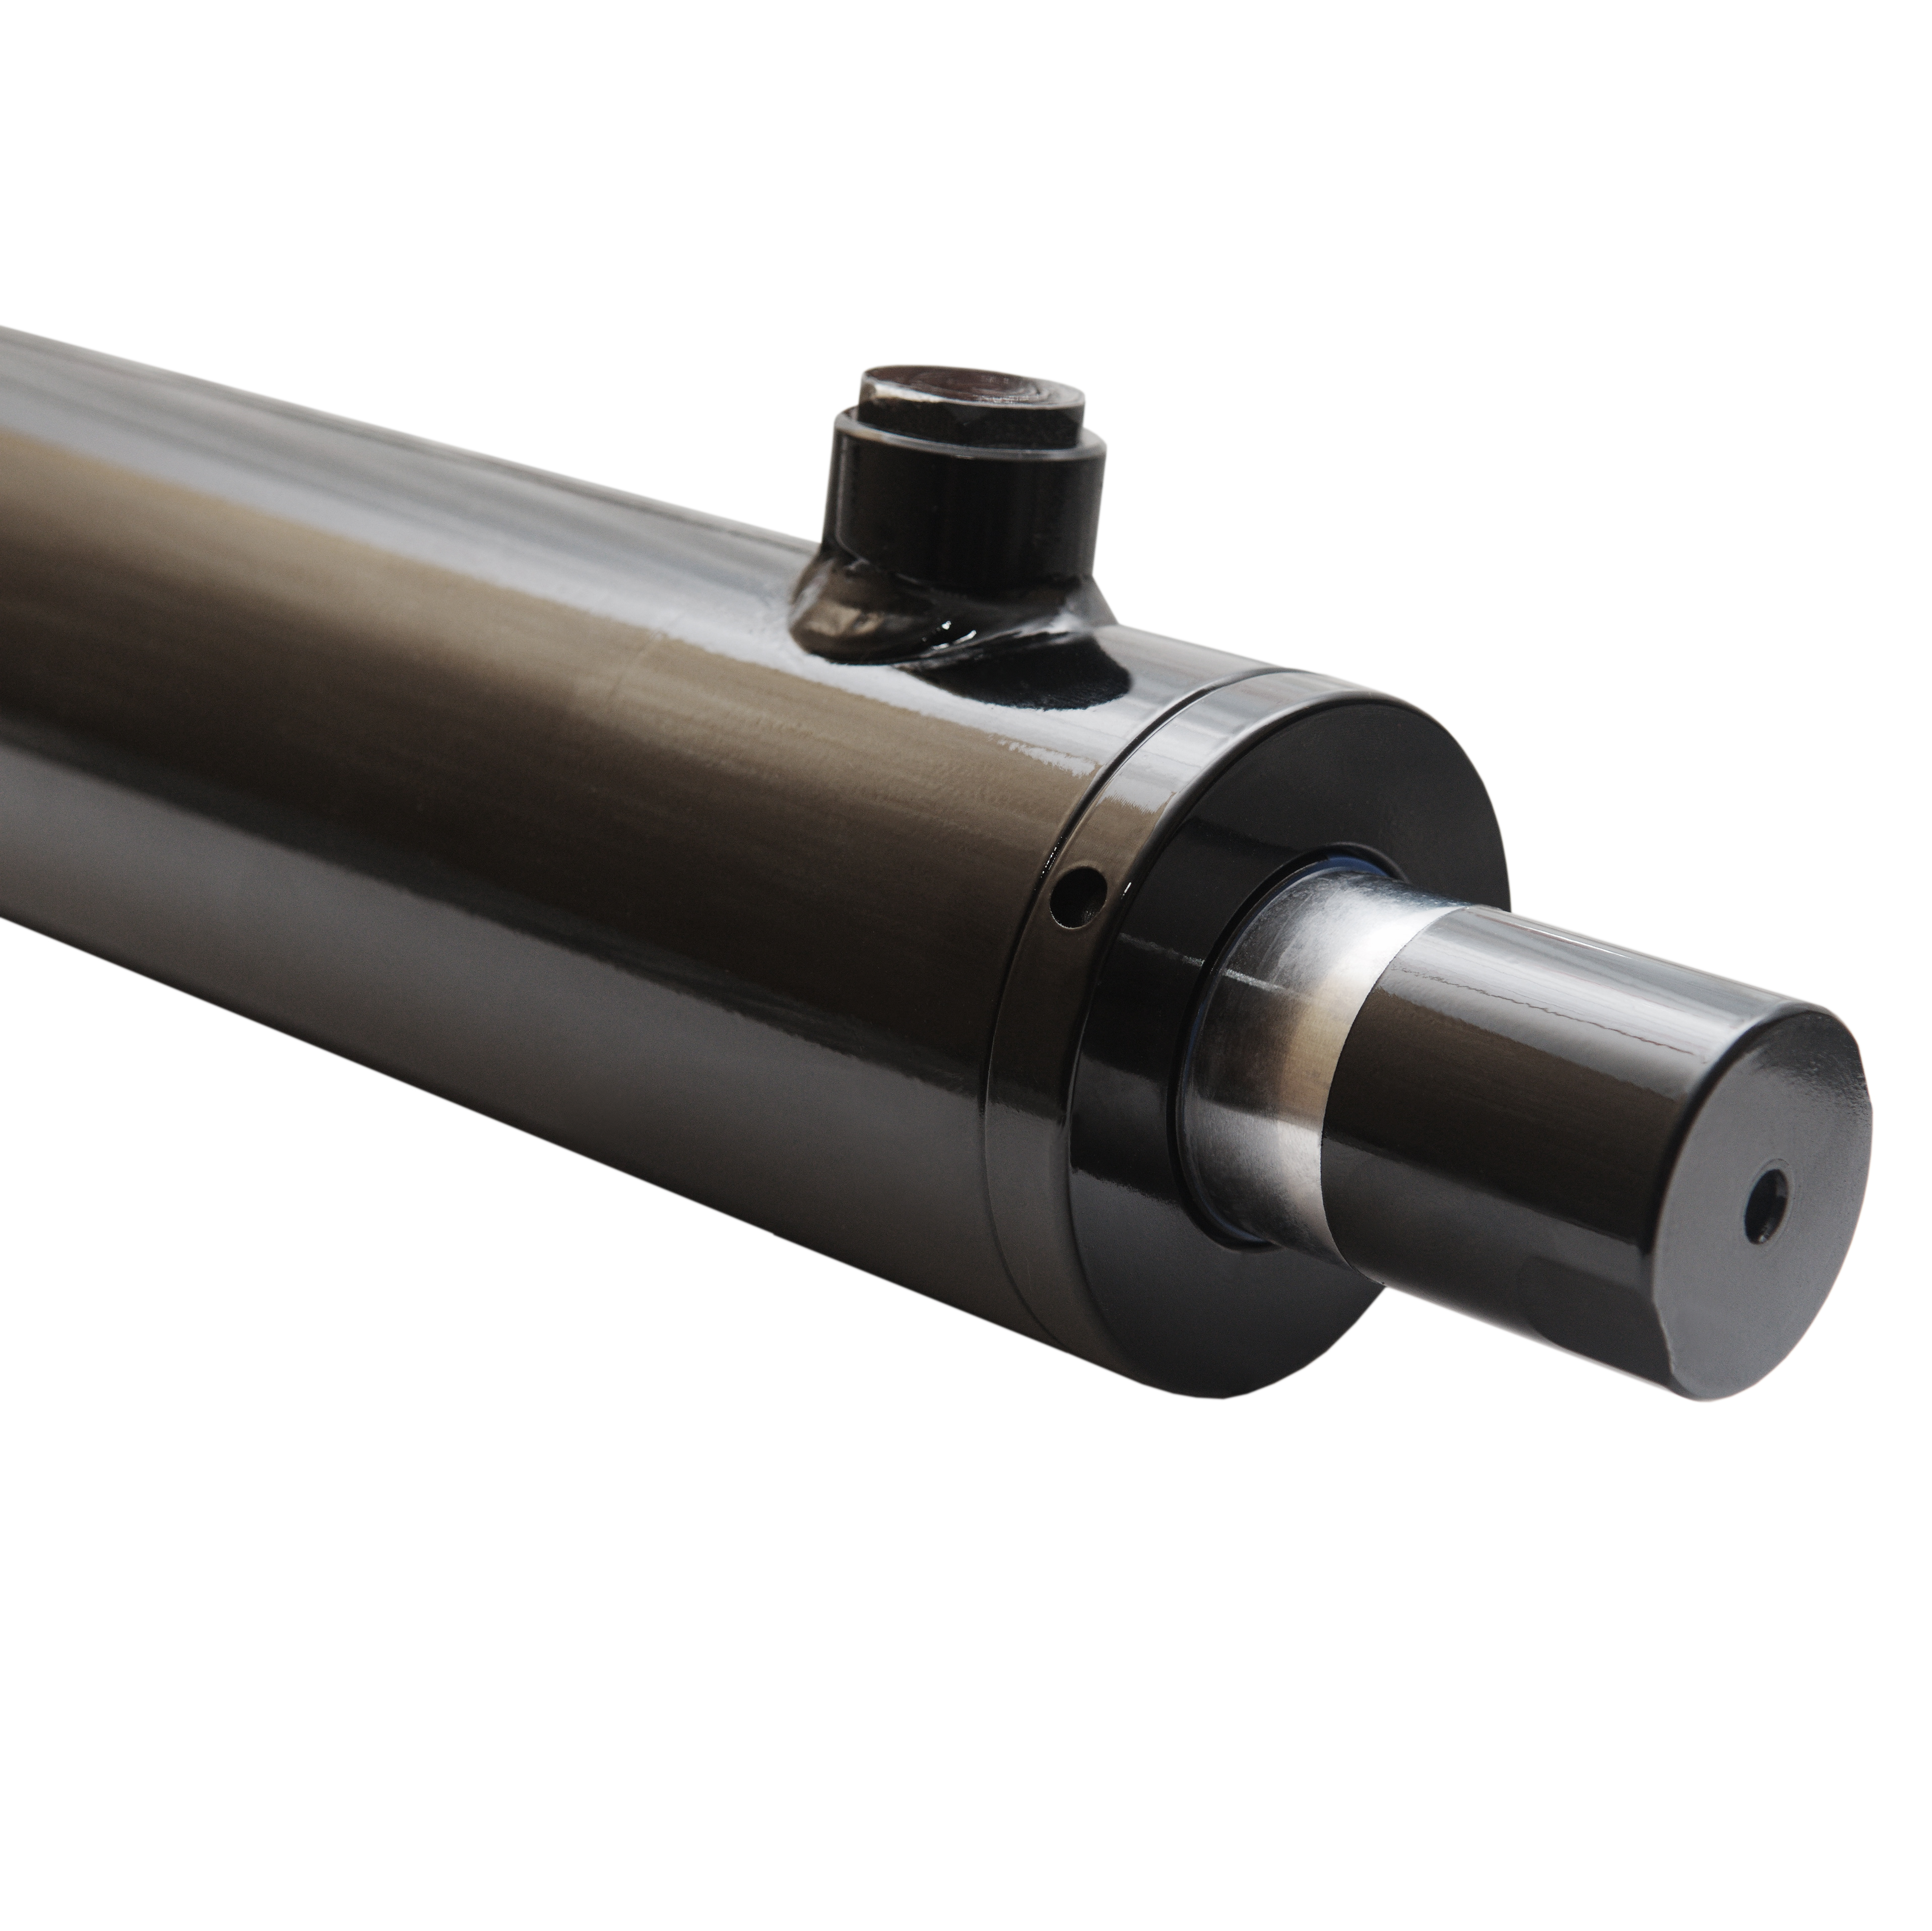 2.5 bore x 10 stroke hydraulic cylinder, welded universal double acting cylinder | Magister Hydraulics